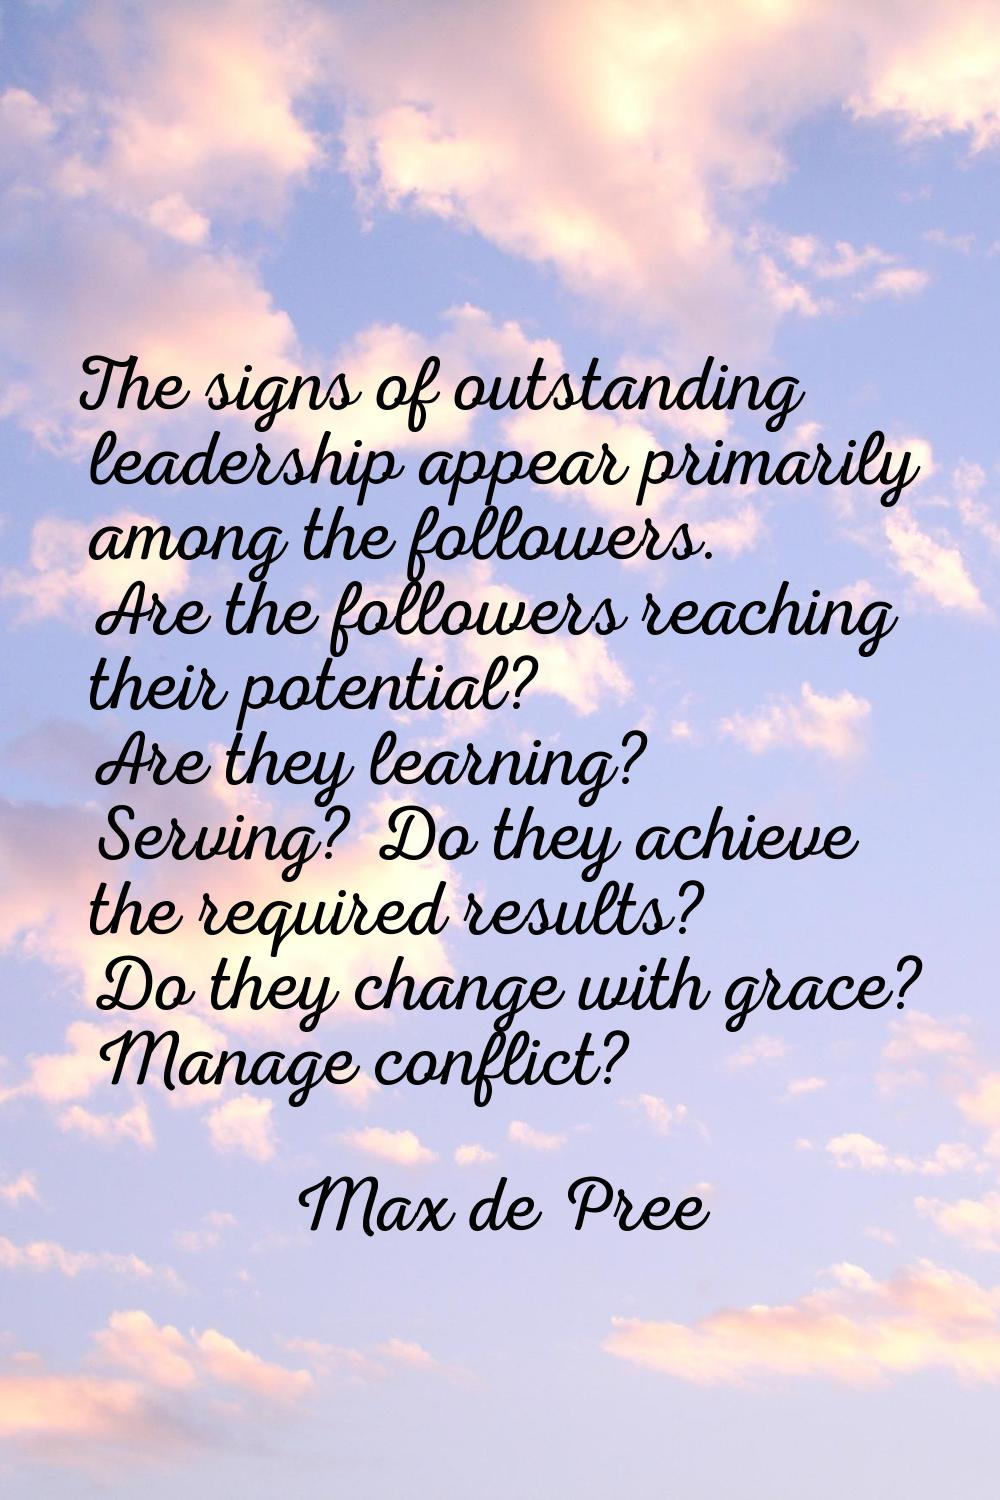 The signs of outstanding leadership appear primarily among the followers. Are the followers reachin